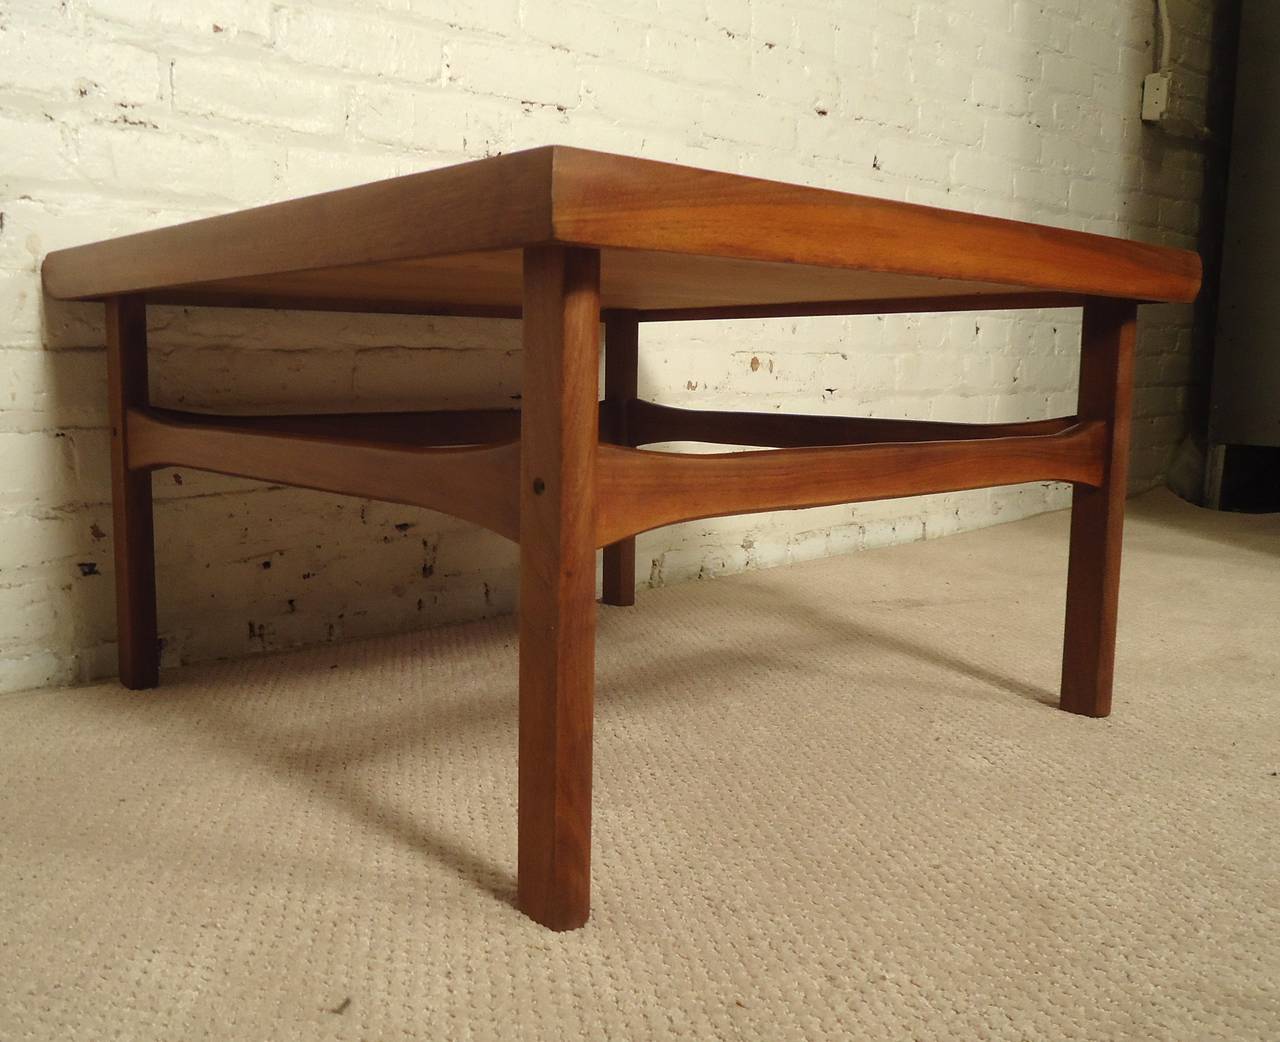 Vintage modern Danish table with simple lines and nicely turned edge. Attractive wood grain, sculpted stretchers.

(Please confirm item location - NY or NJ - with dealer)